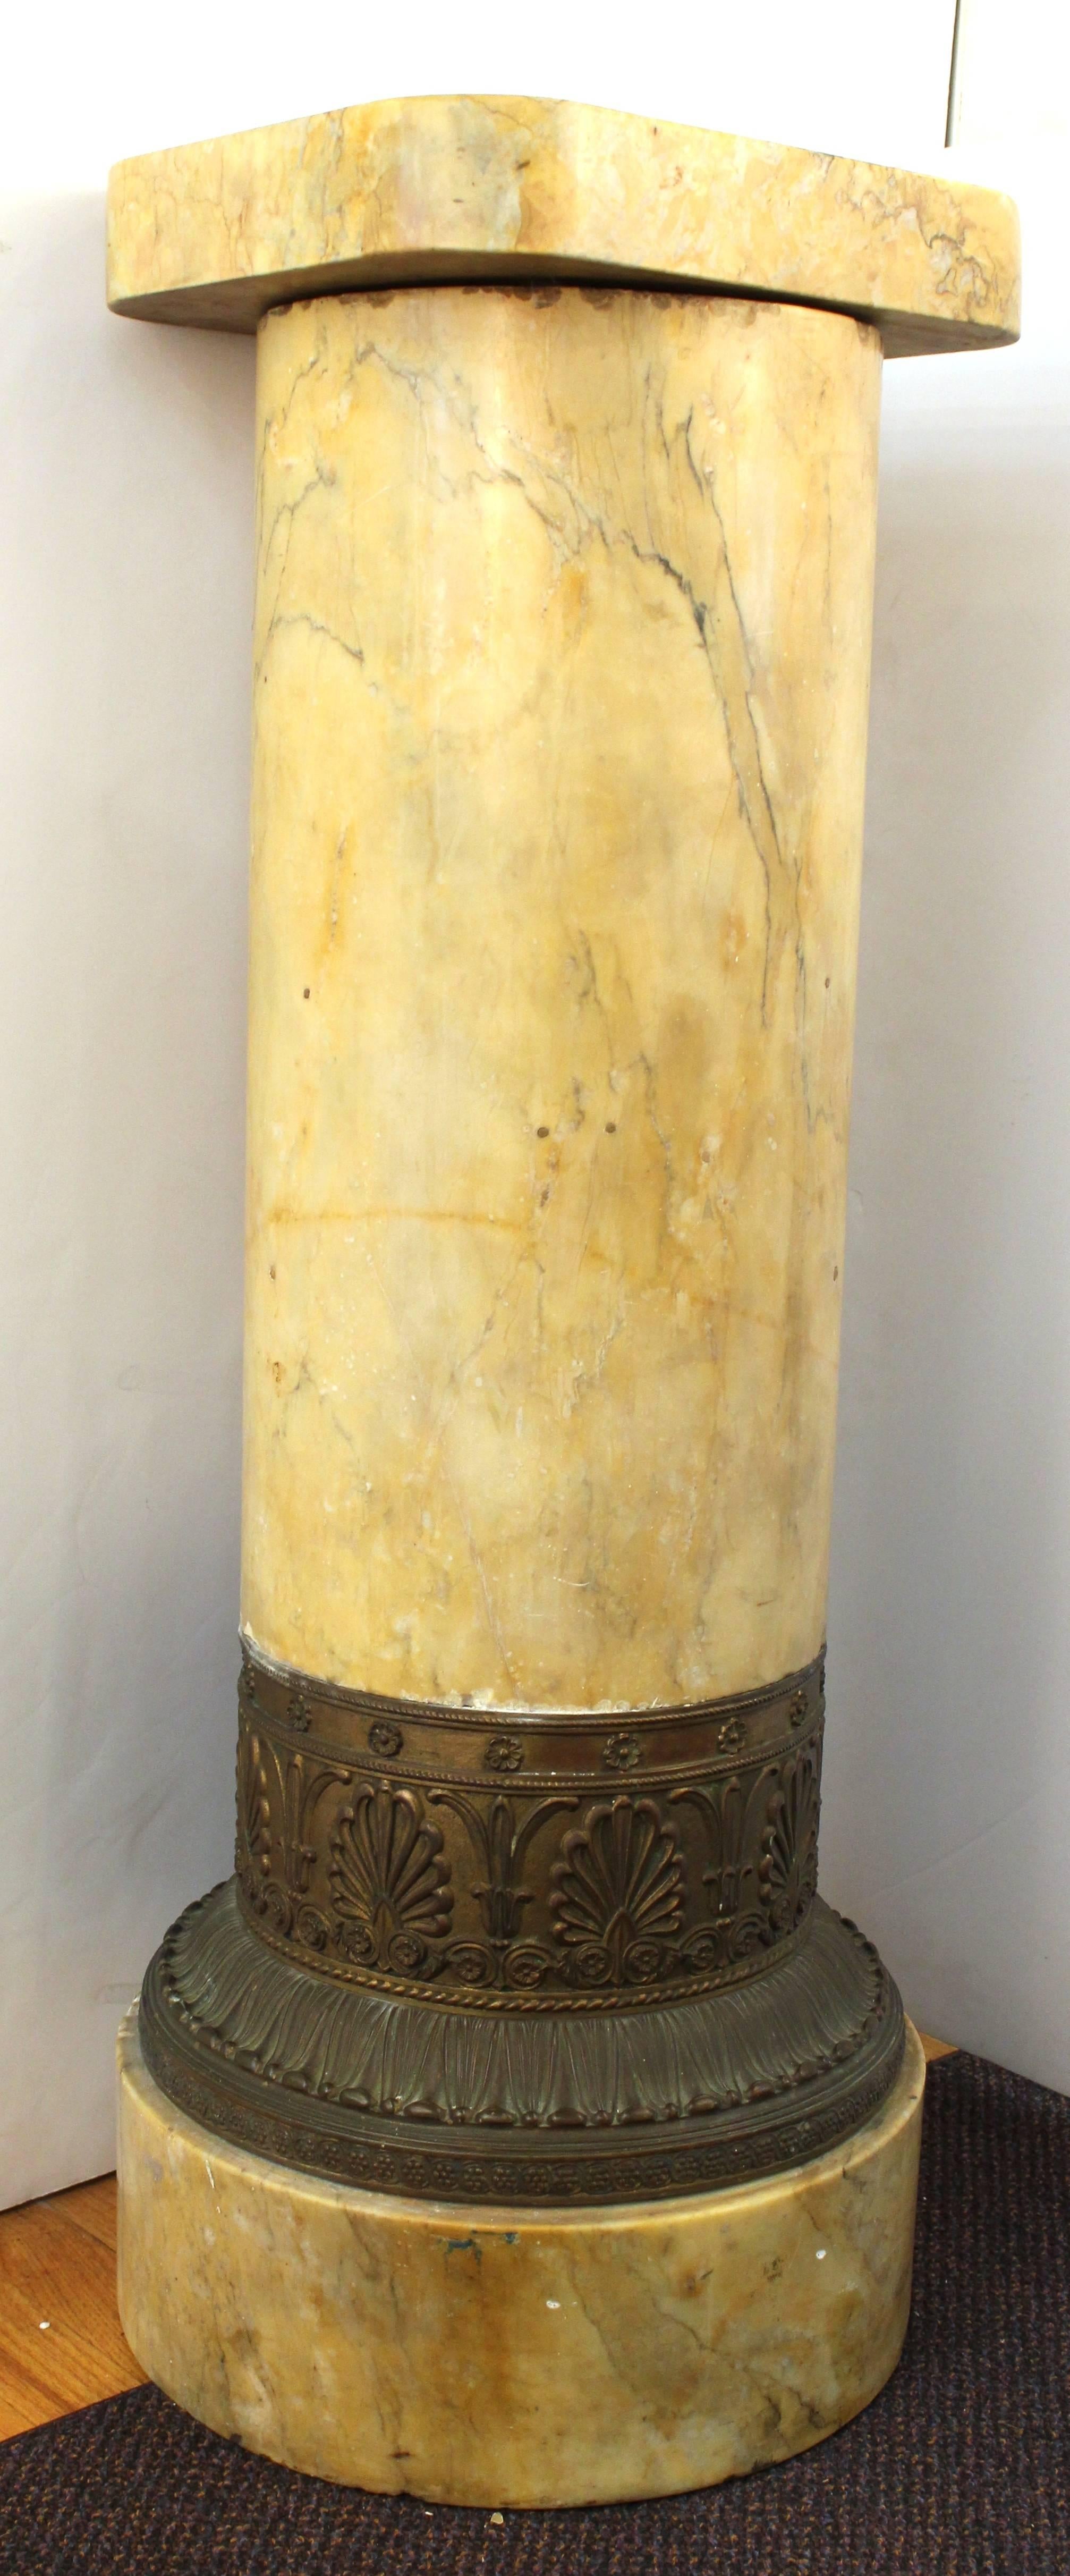 Neoclassical Revival 19th Century Pedestal in Solid Marble with Decorative Band in Bronze